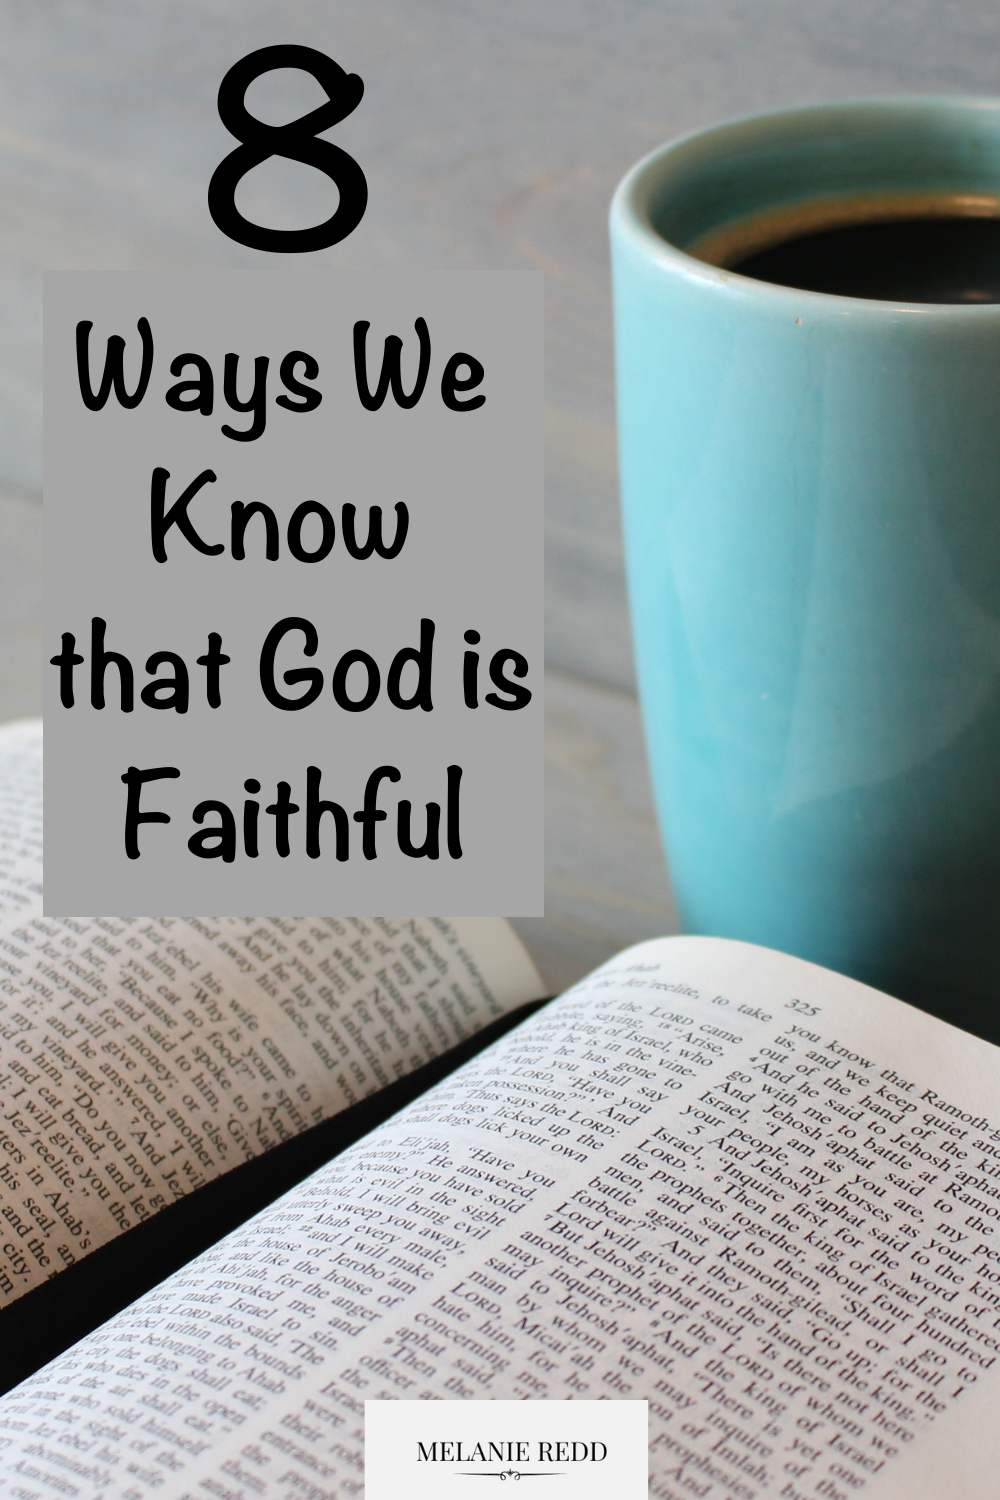 Most of us have known about it since we were small children. We've heard about the faithfulness of God in church and Sunday school. But, how do we know it's true? Here are 8 ways we know that God is faithful. Why not drop by to read them? #godisfaithful #faithfulnessofgod #hope